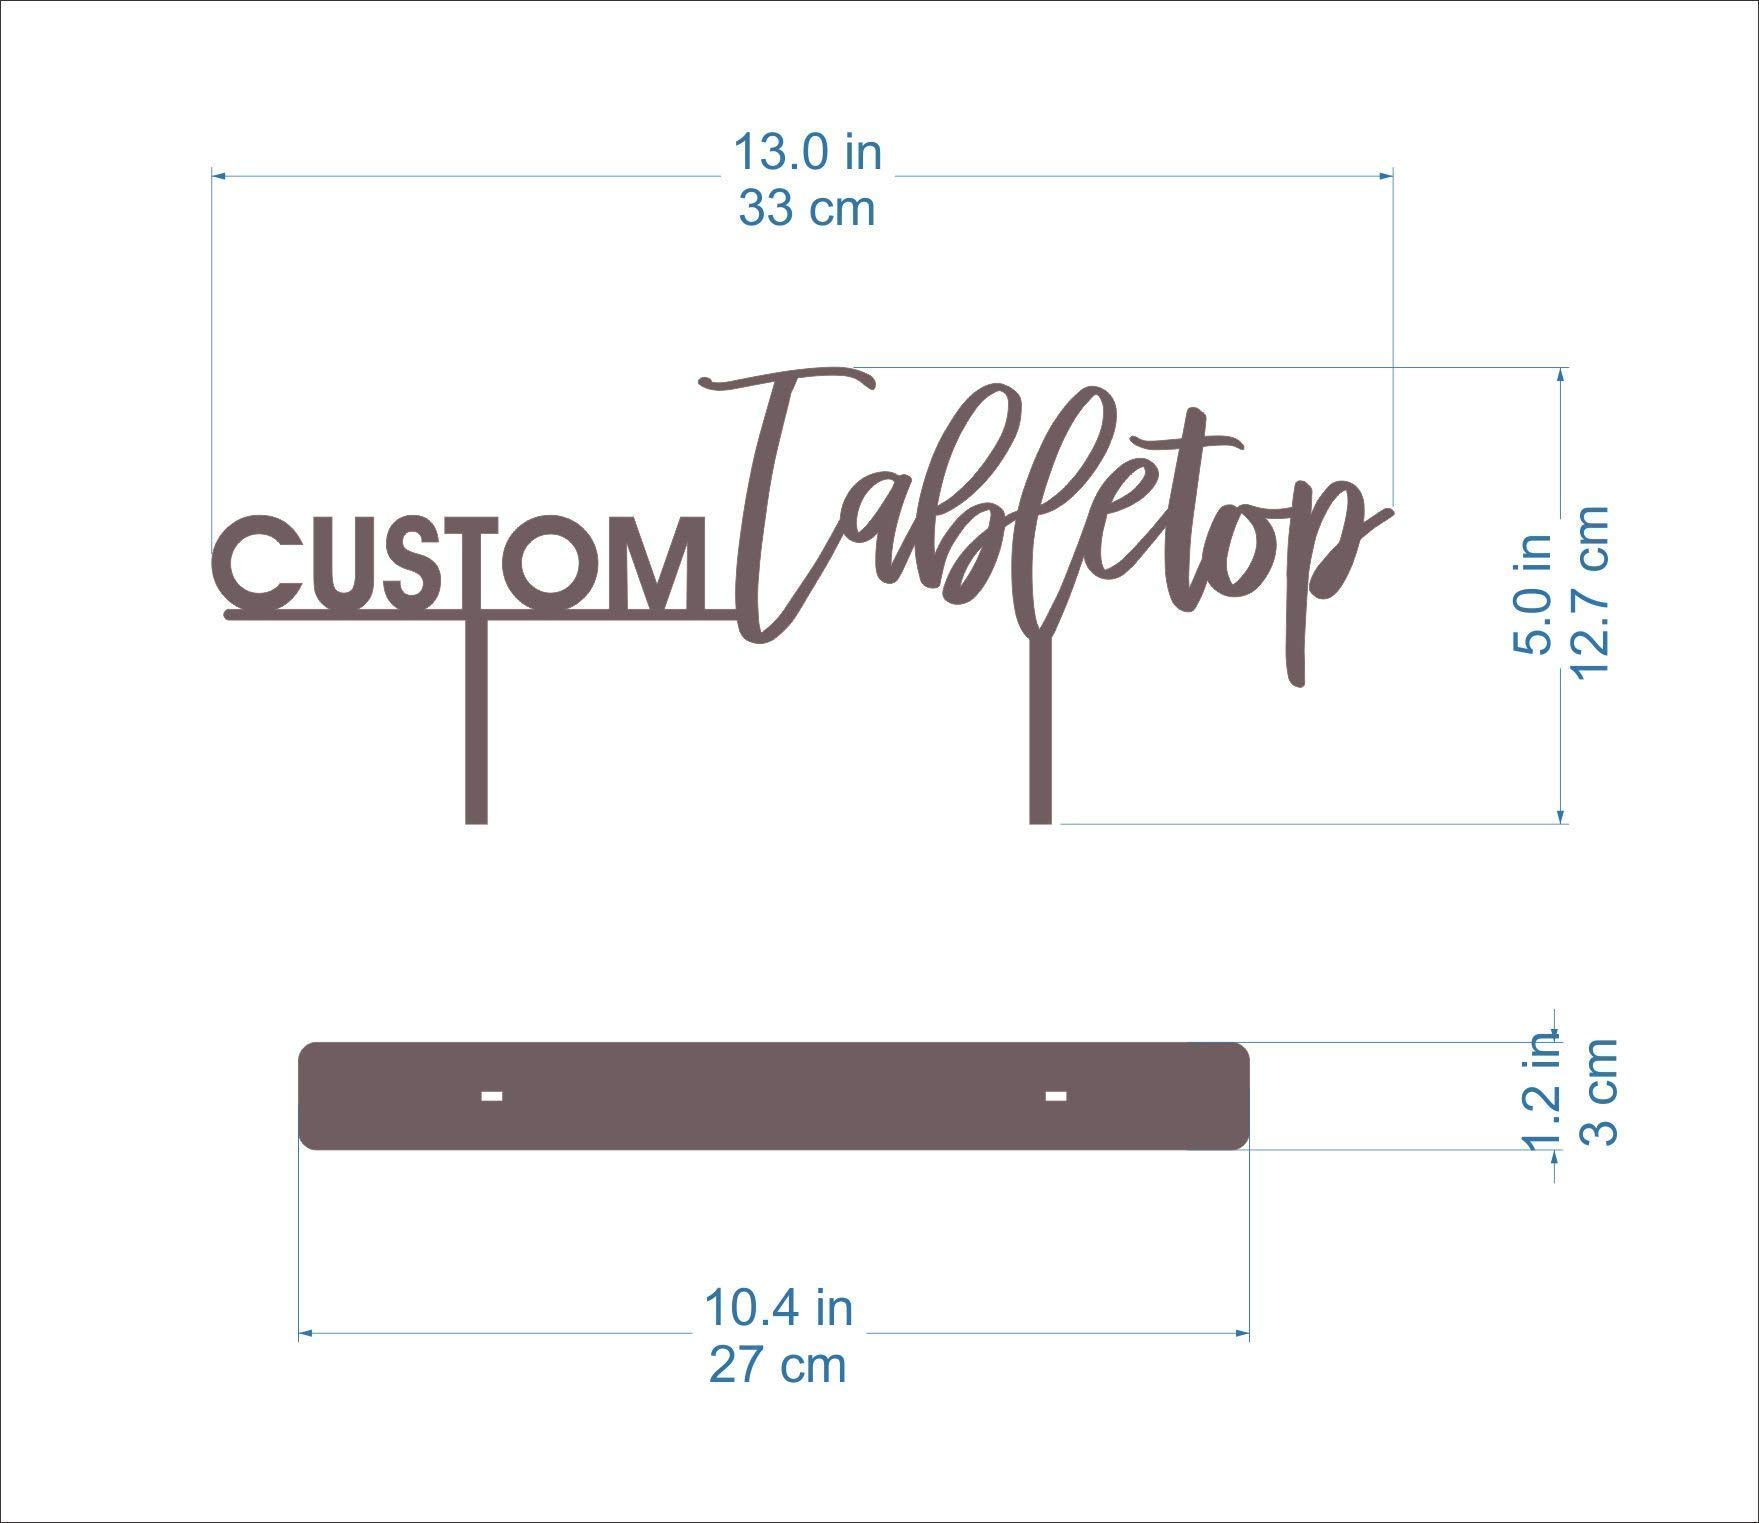 Your Custom Text Here Tabletop Sign Hashtag Personalized Wedding Calligraphy Laser Cut Acrylic Freestanding Sweetheart Table Decorations Desert Sign Party Welcome Wood Tag Home Decor Guestbook Signage